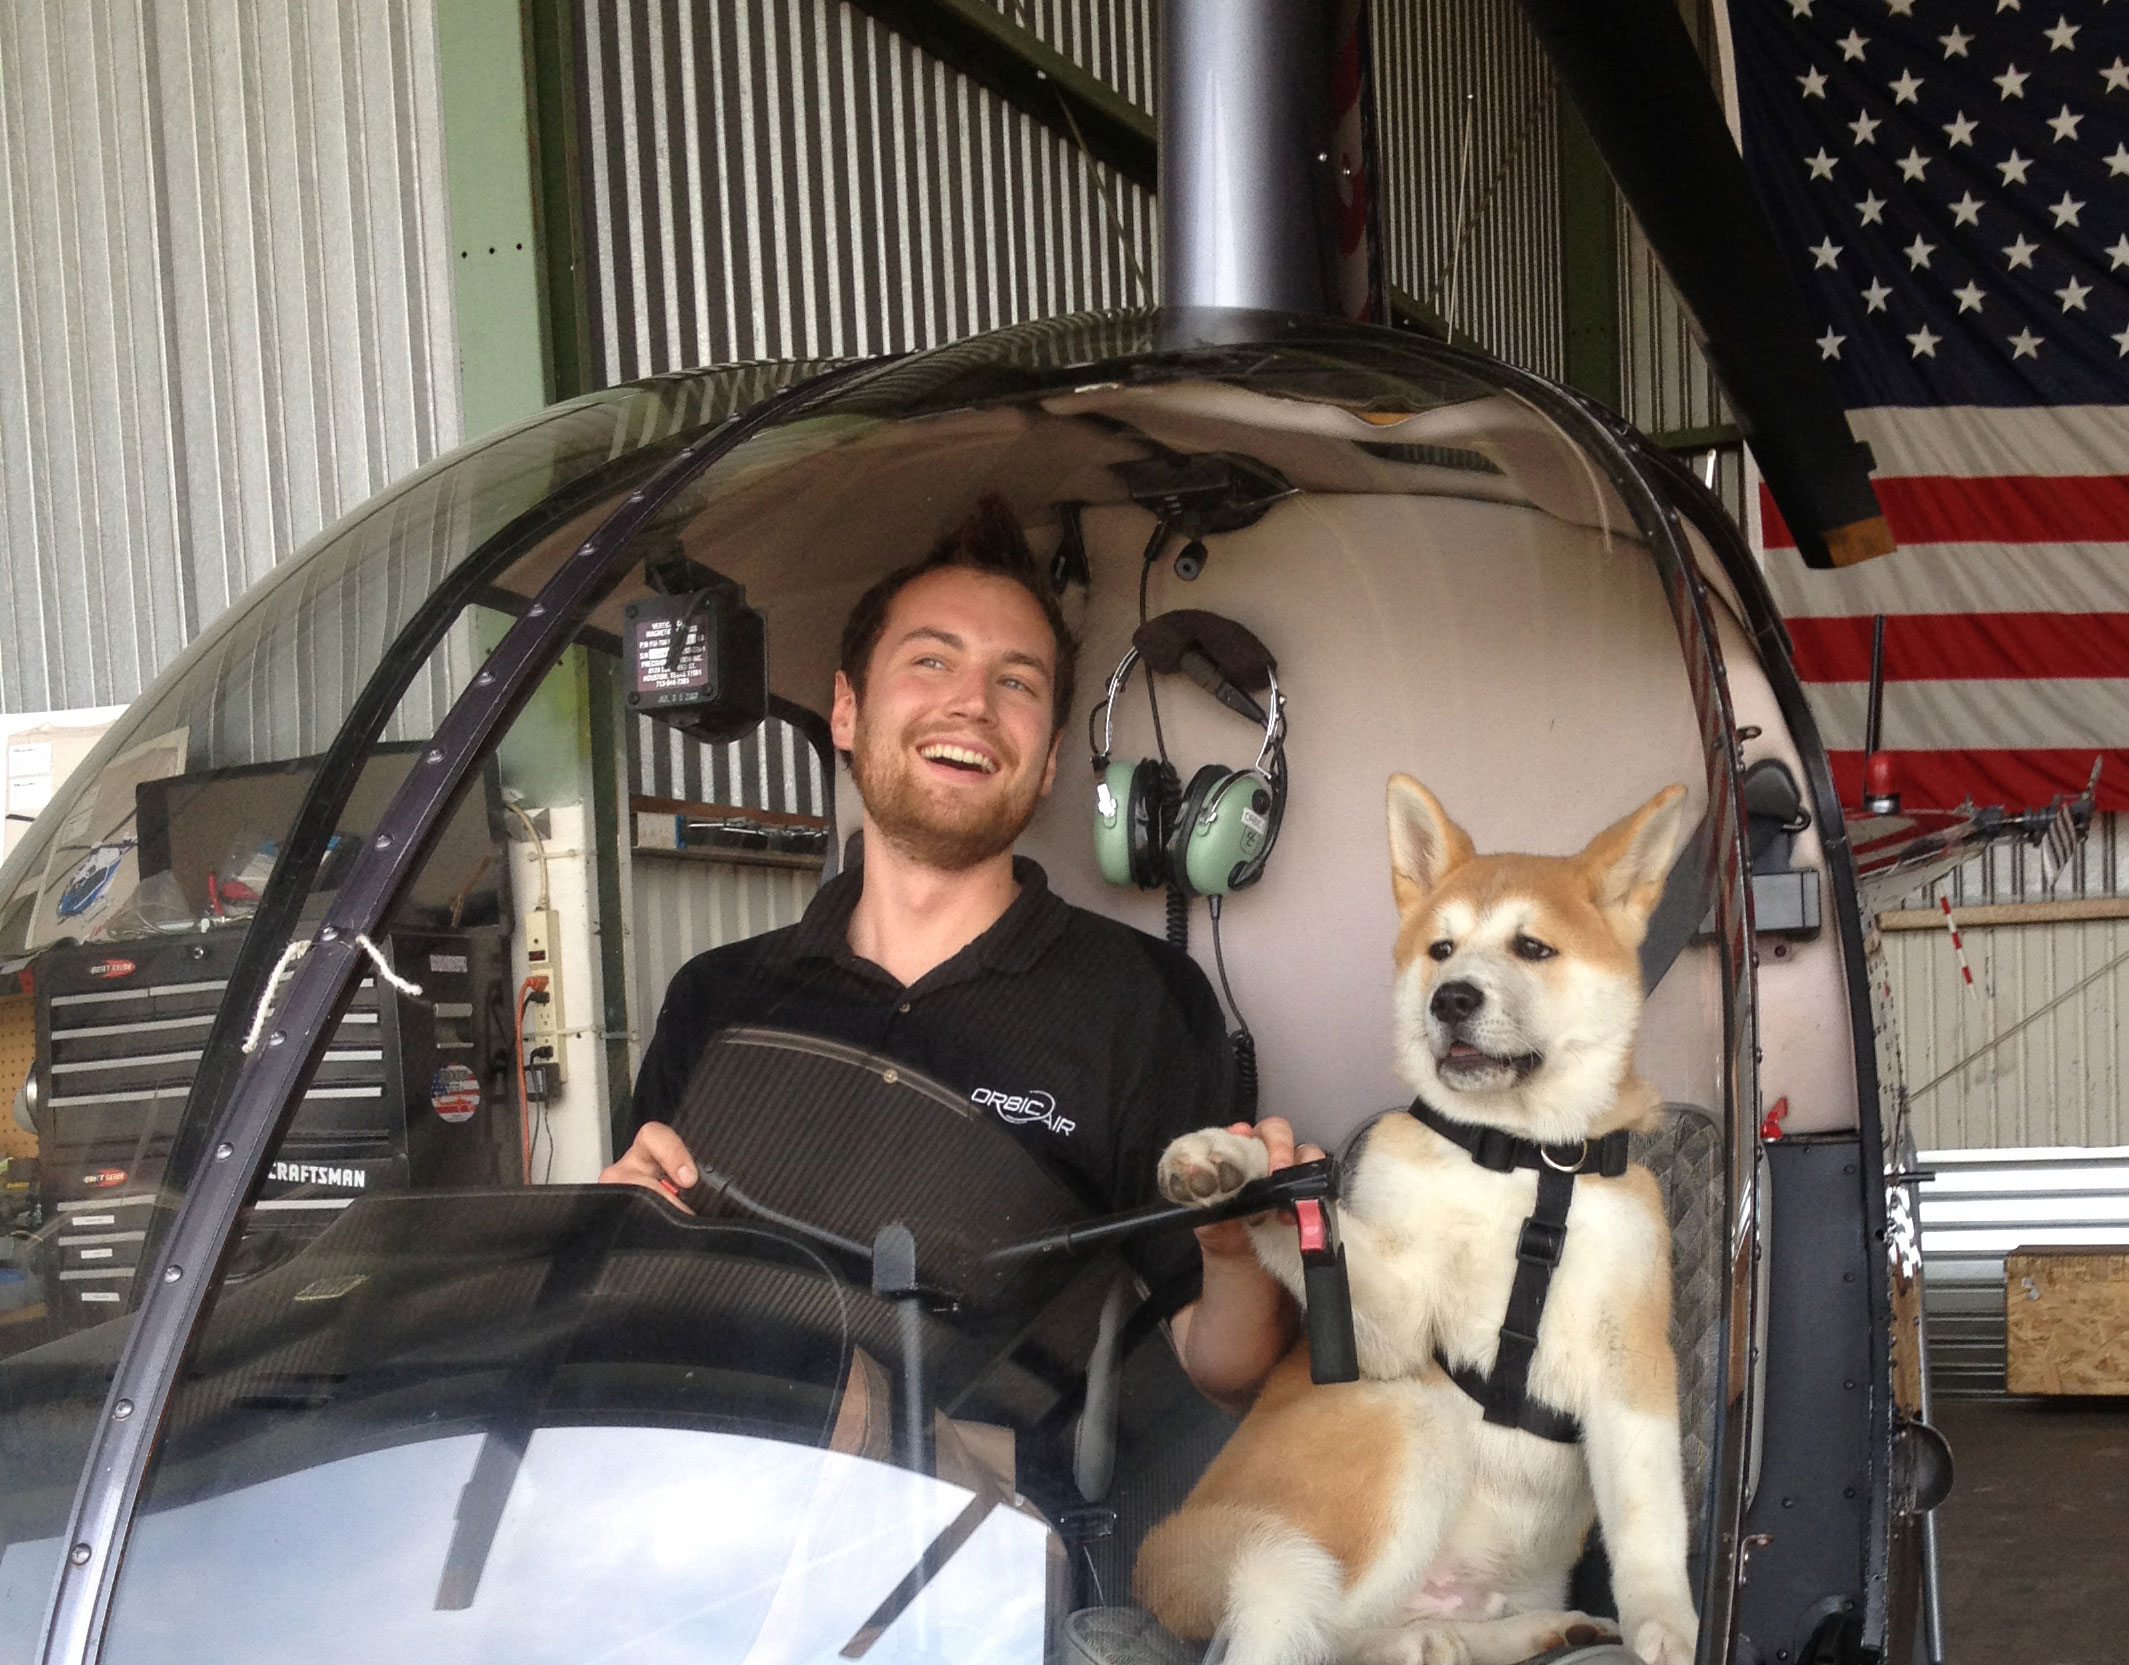 Air welcomes Pilot Michel Poppen to our